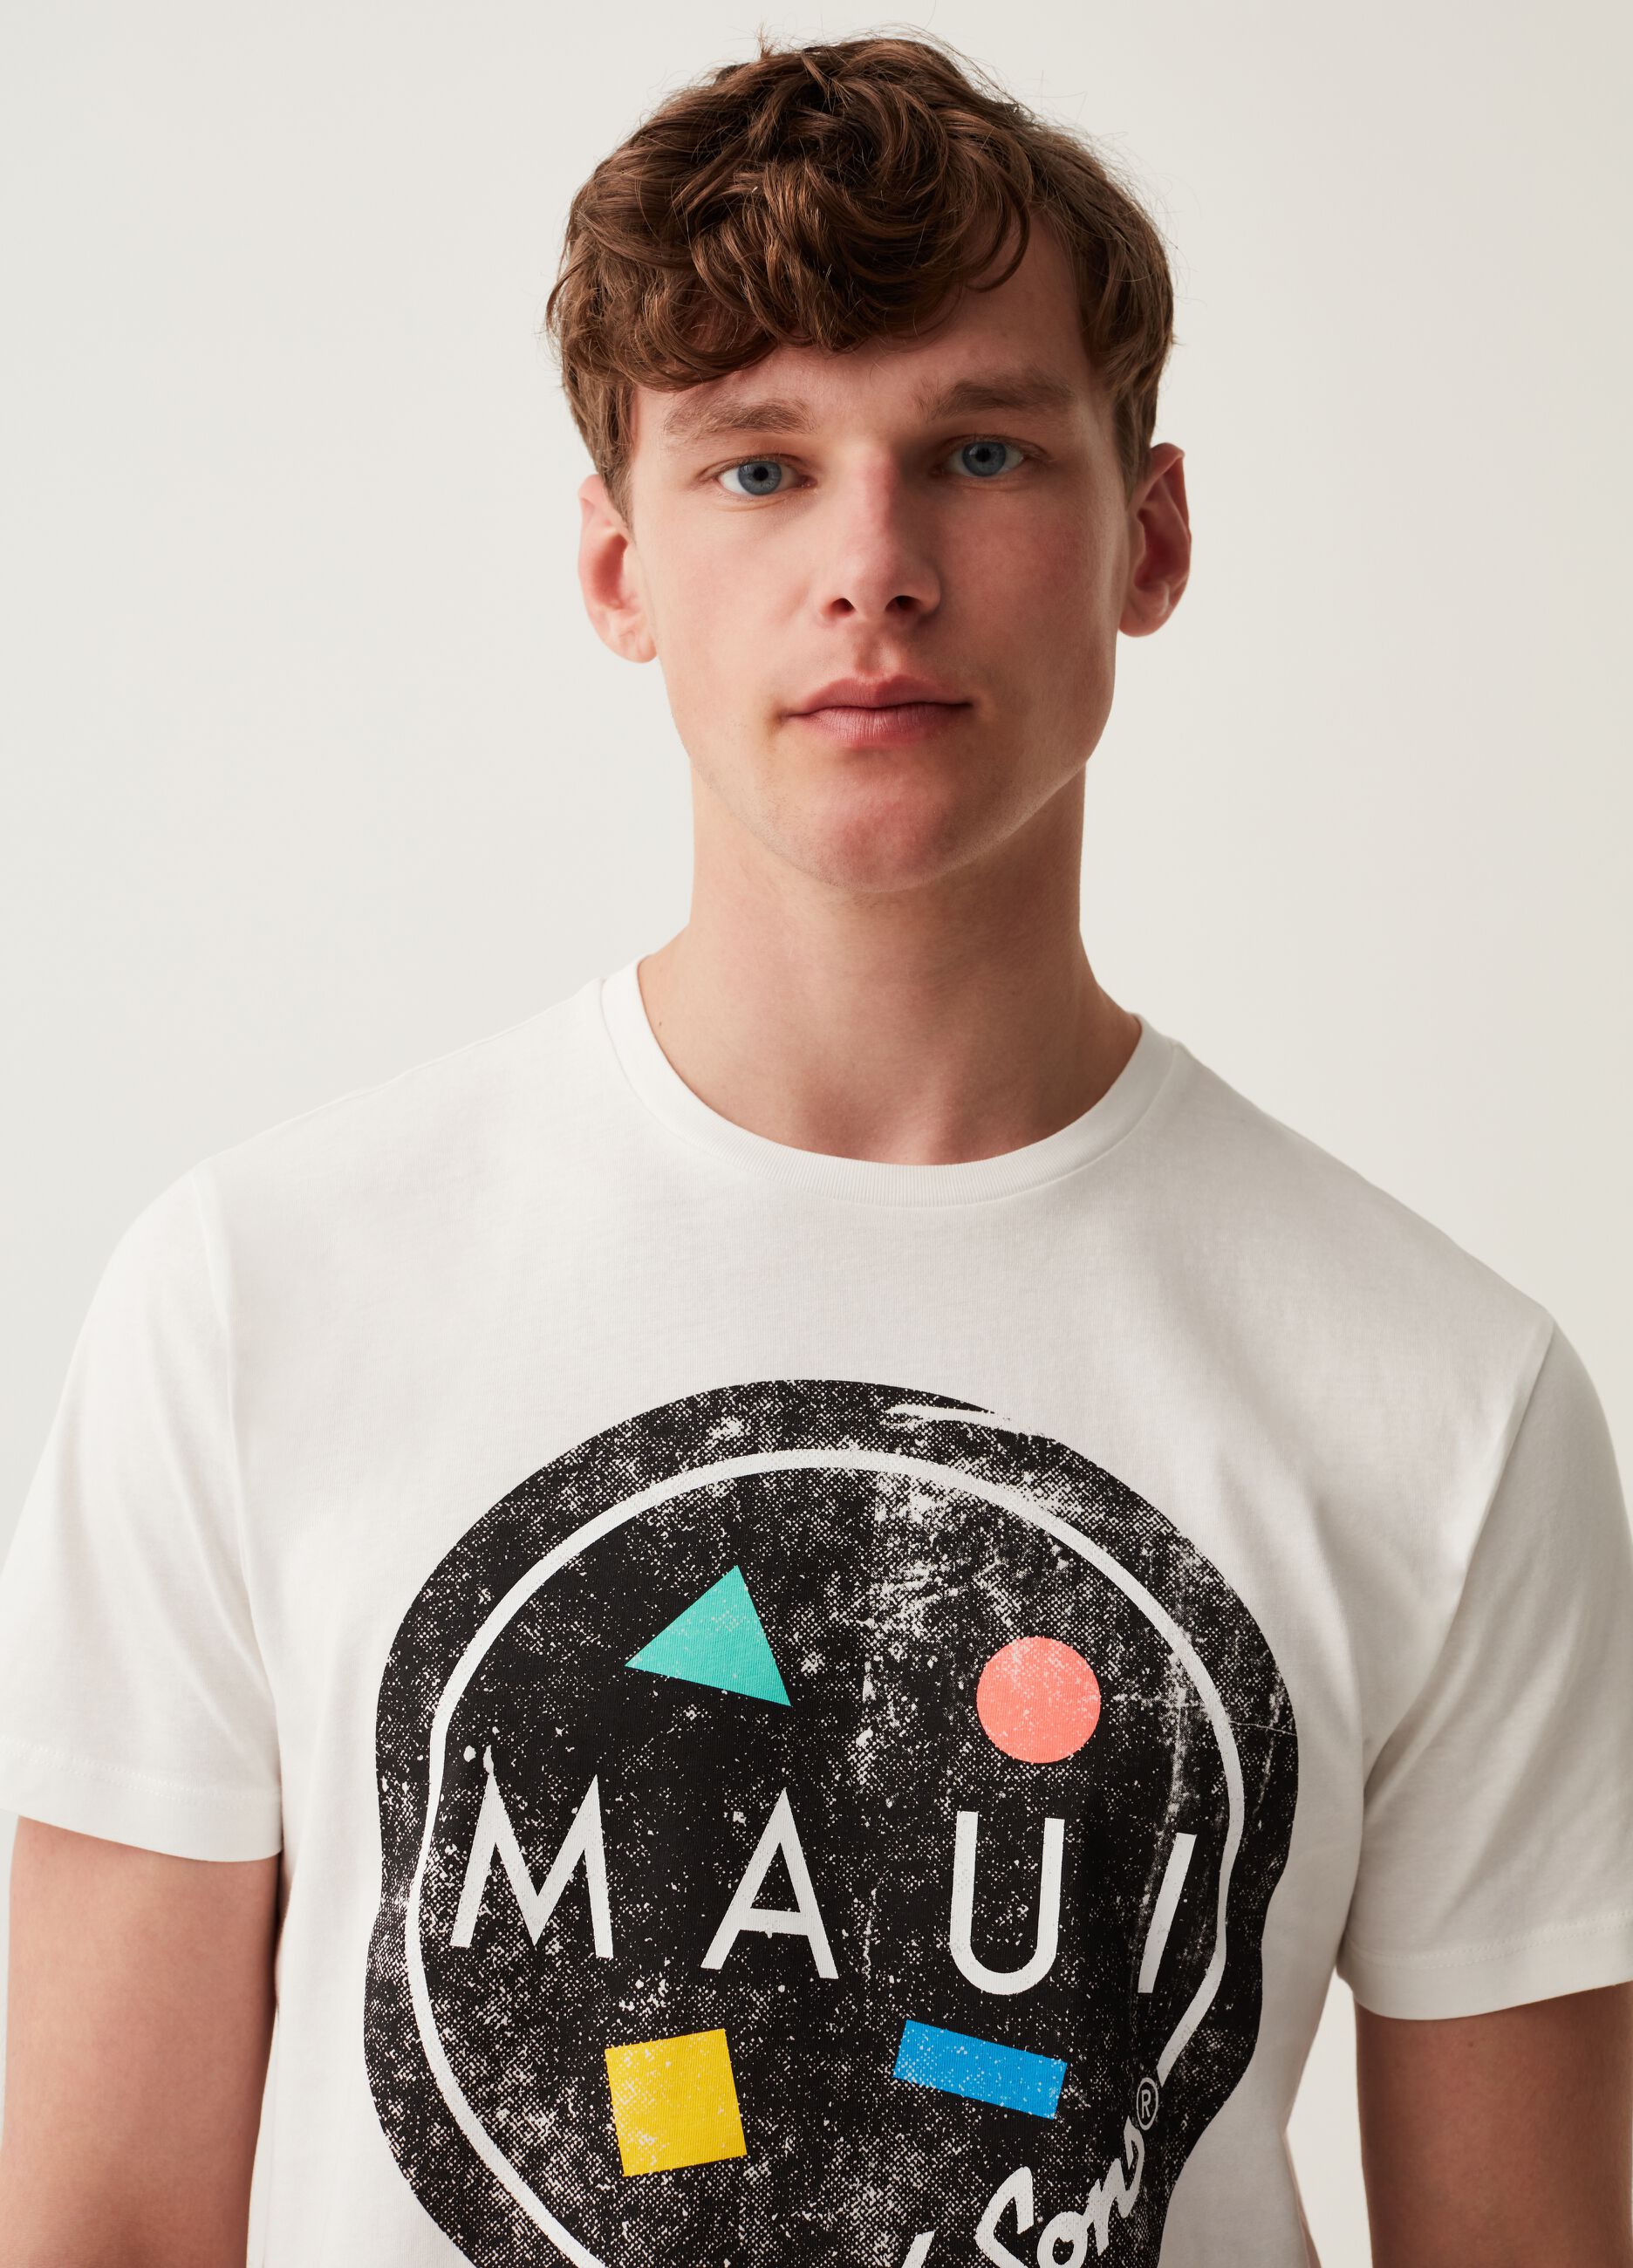 Cotton T-shirt with Maui and Sons print